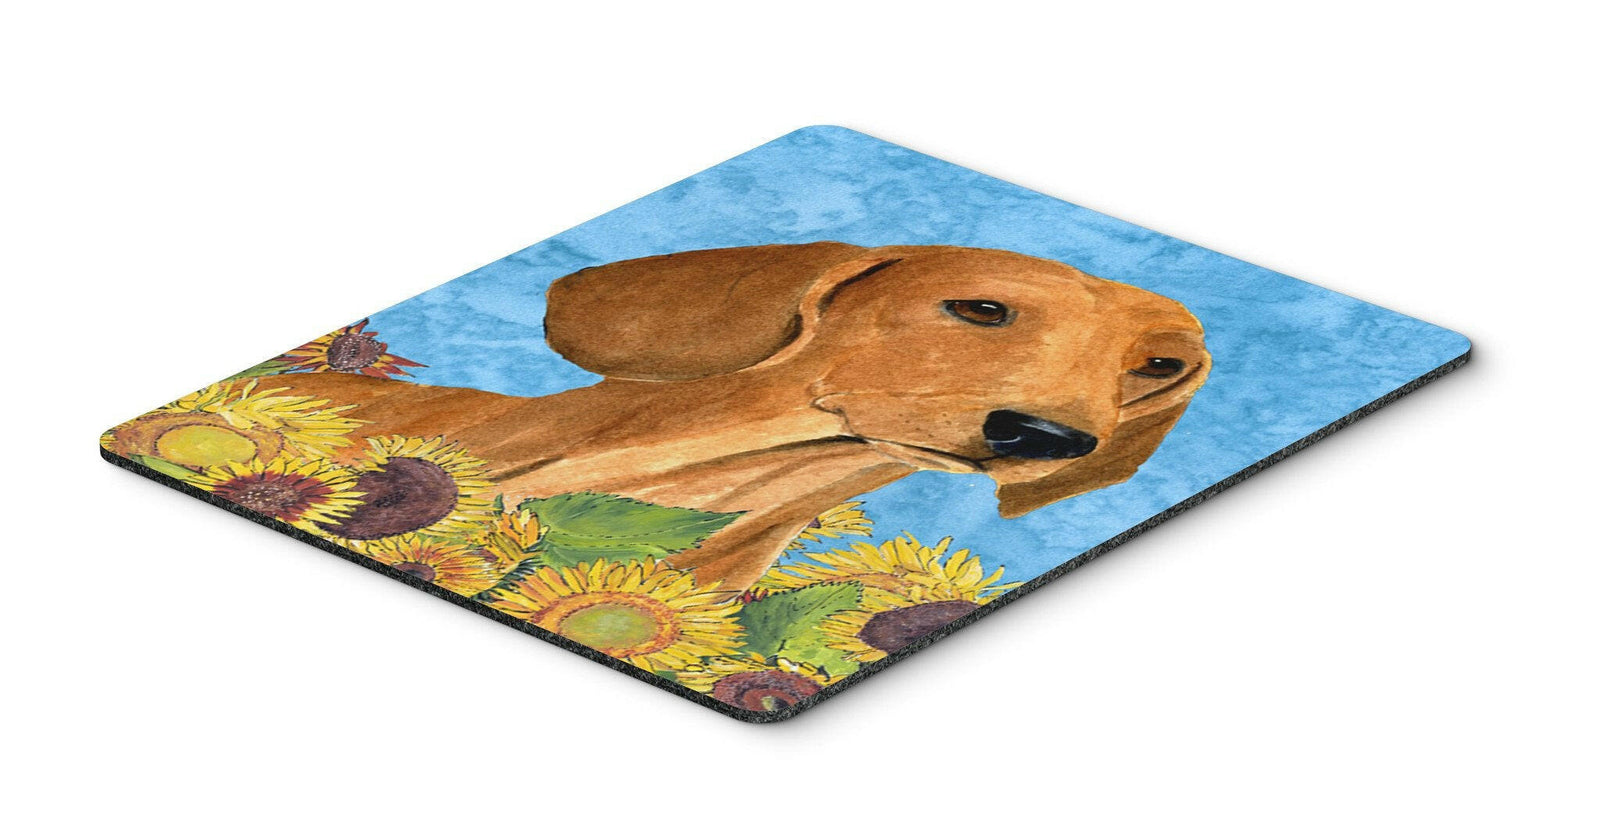 Dachshund Mouse Pad, Hot Pad or Trivet by Caroline's Treasures